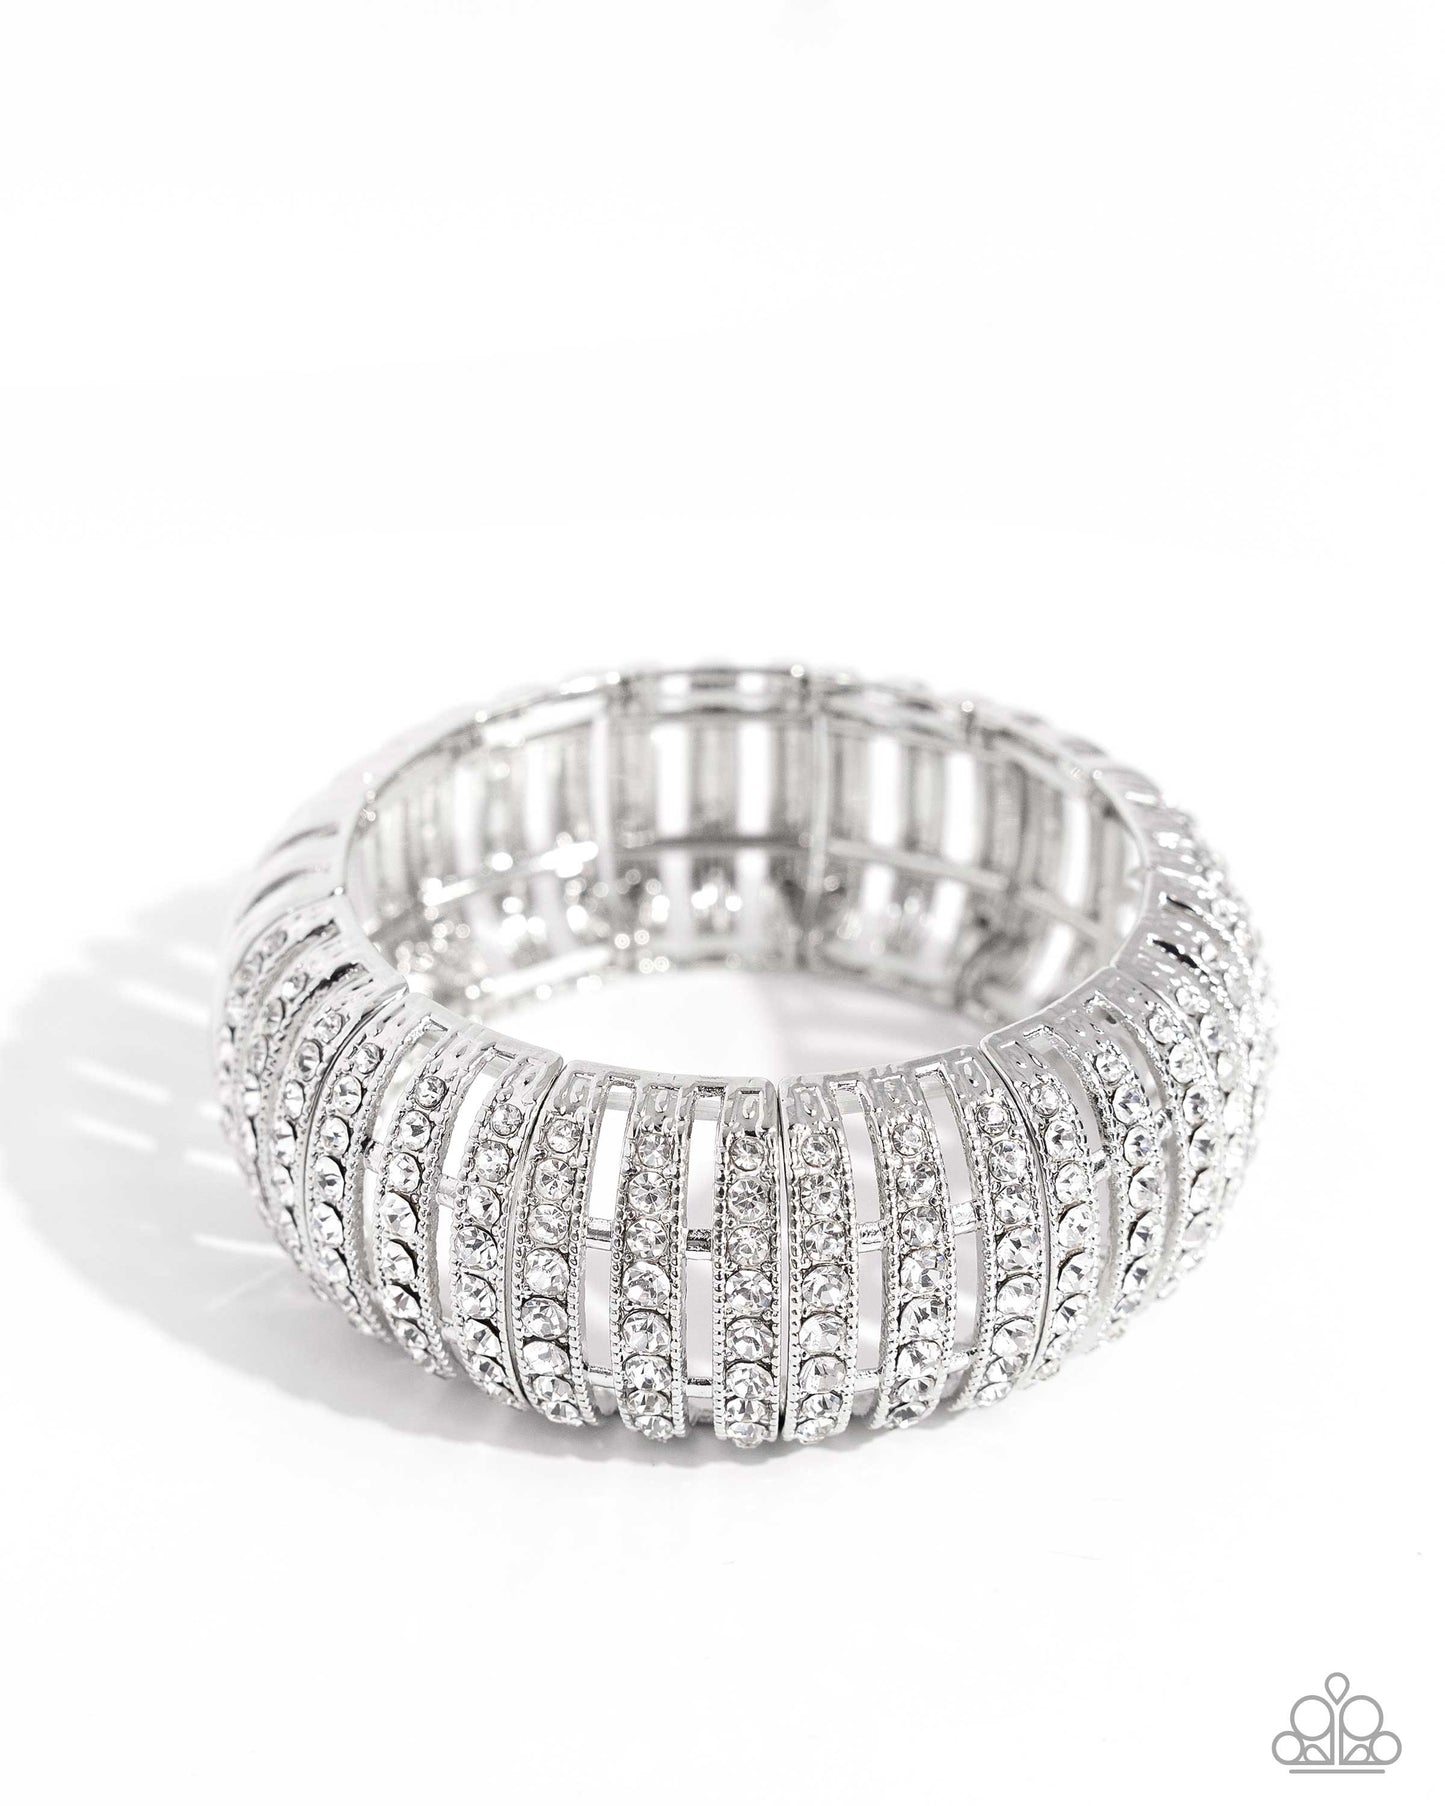 Featuring glistening white gems, trios of curved silver bars join high-sheen curved silver bars for a radiant, light-catching display around the wrist on elastic stretchy bands